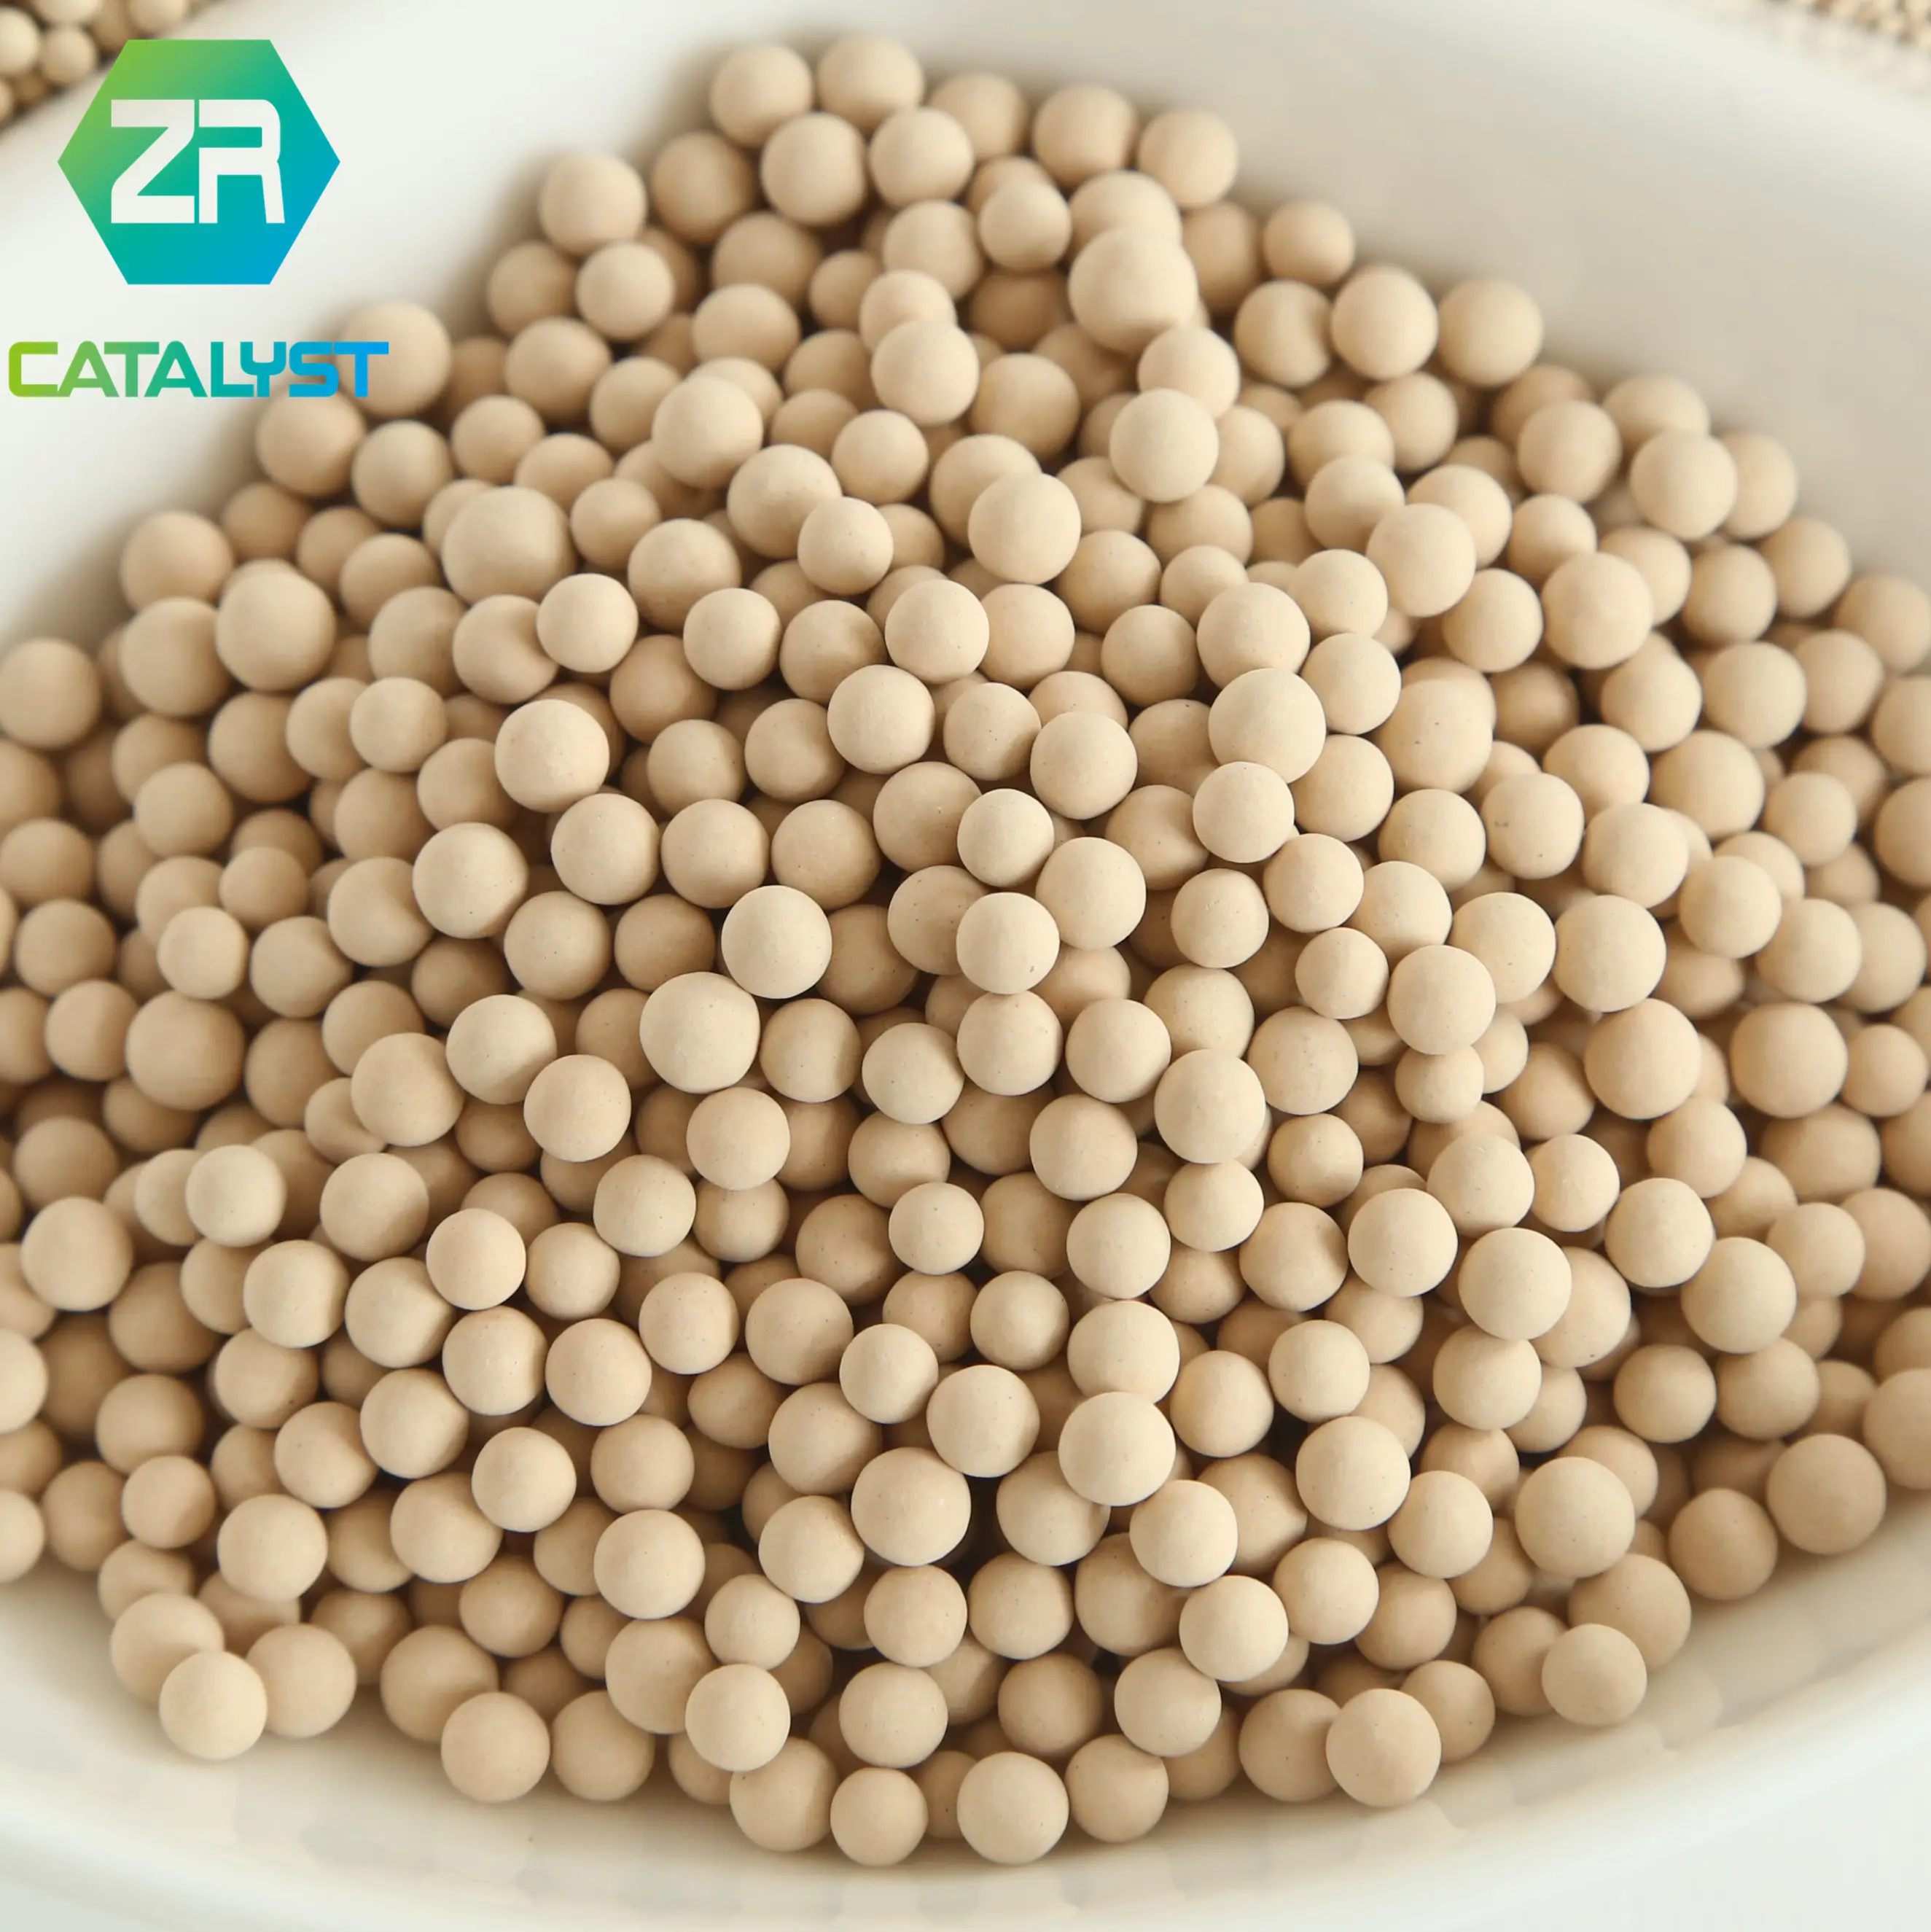 4a molecular sieve desiccant Natural gas drying